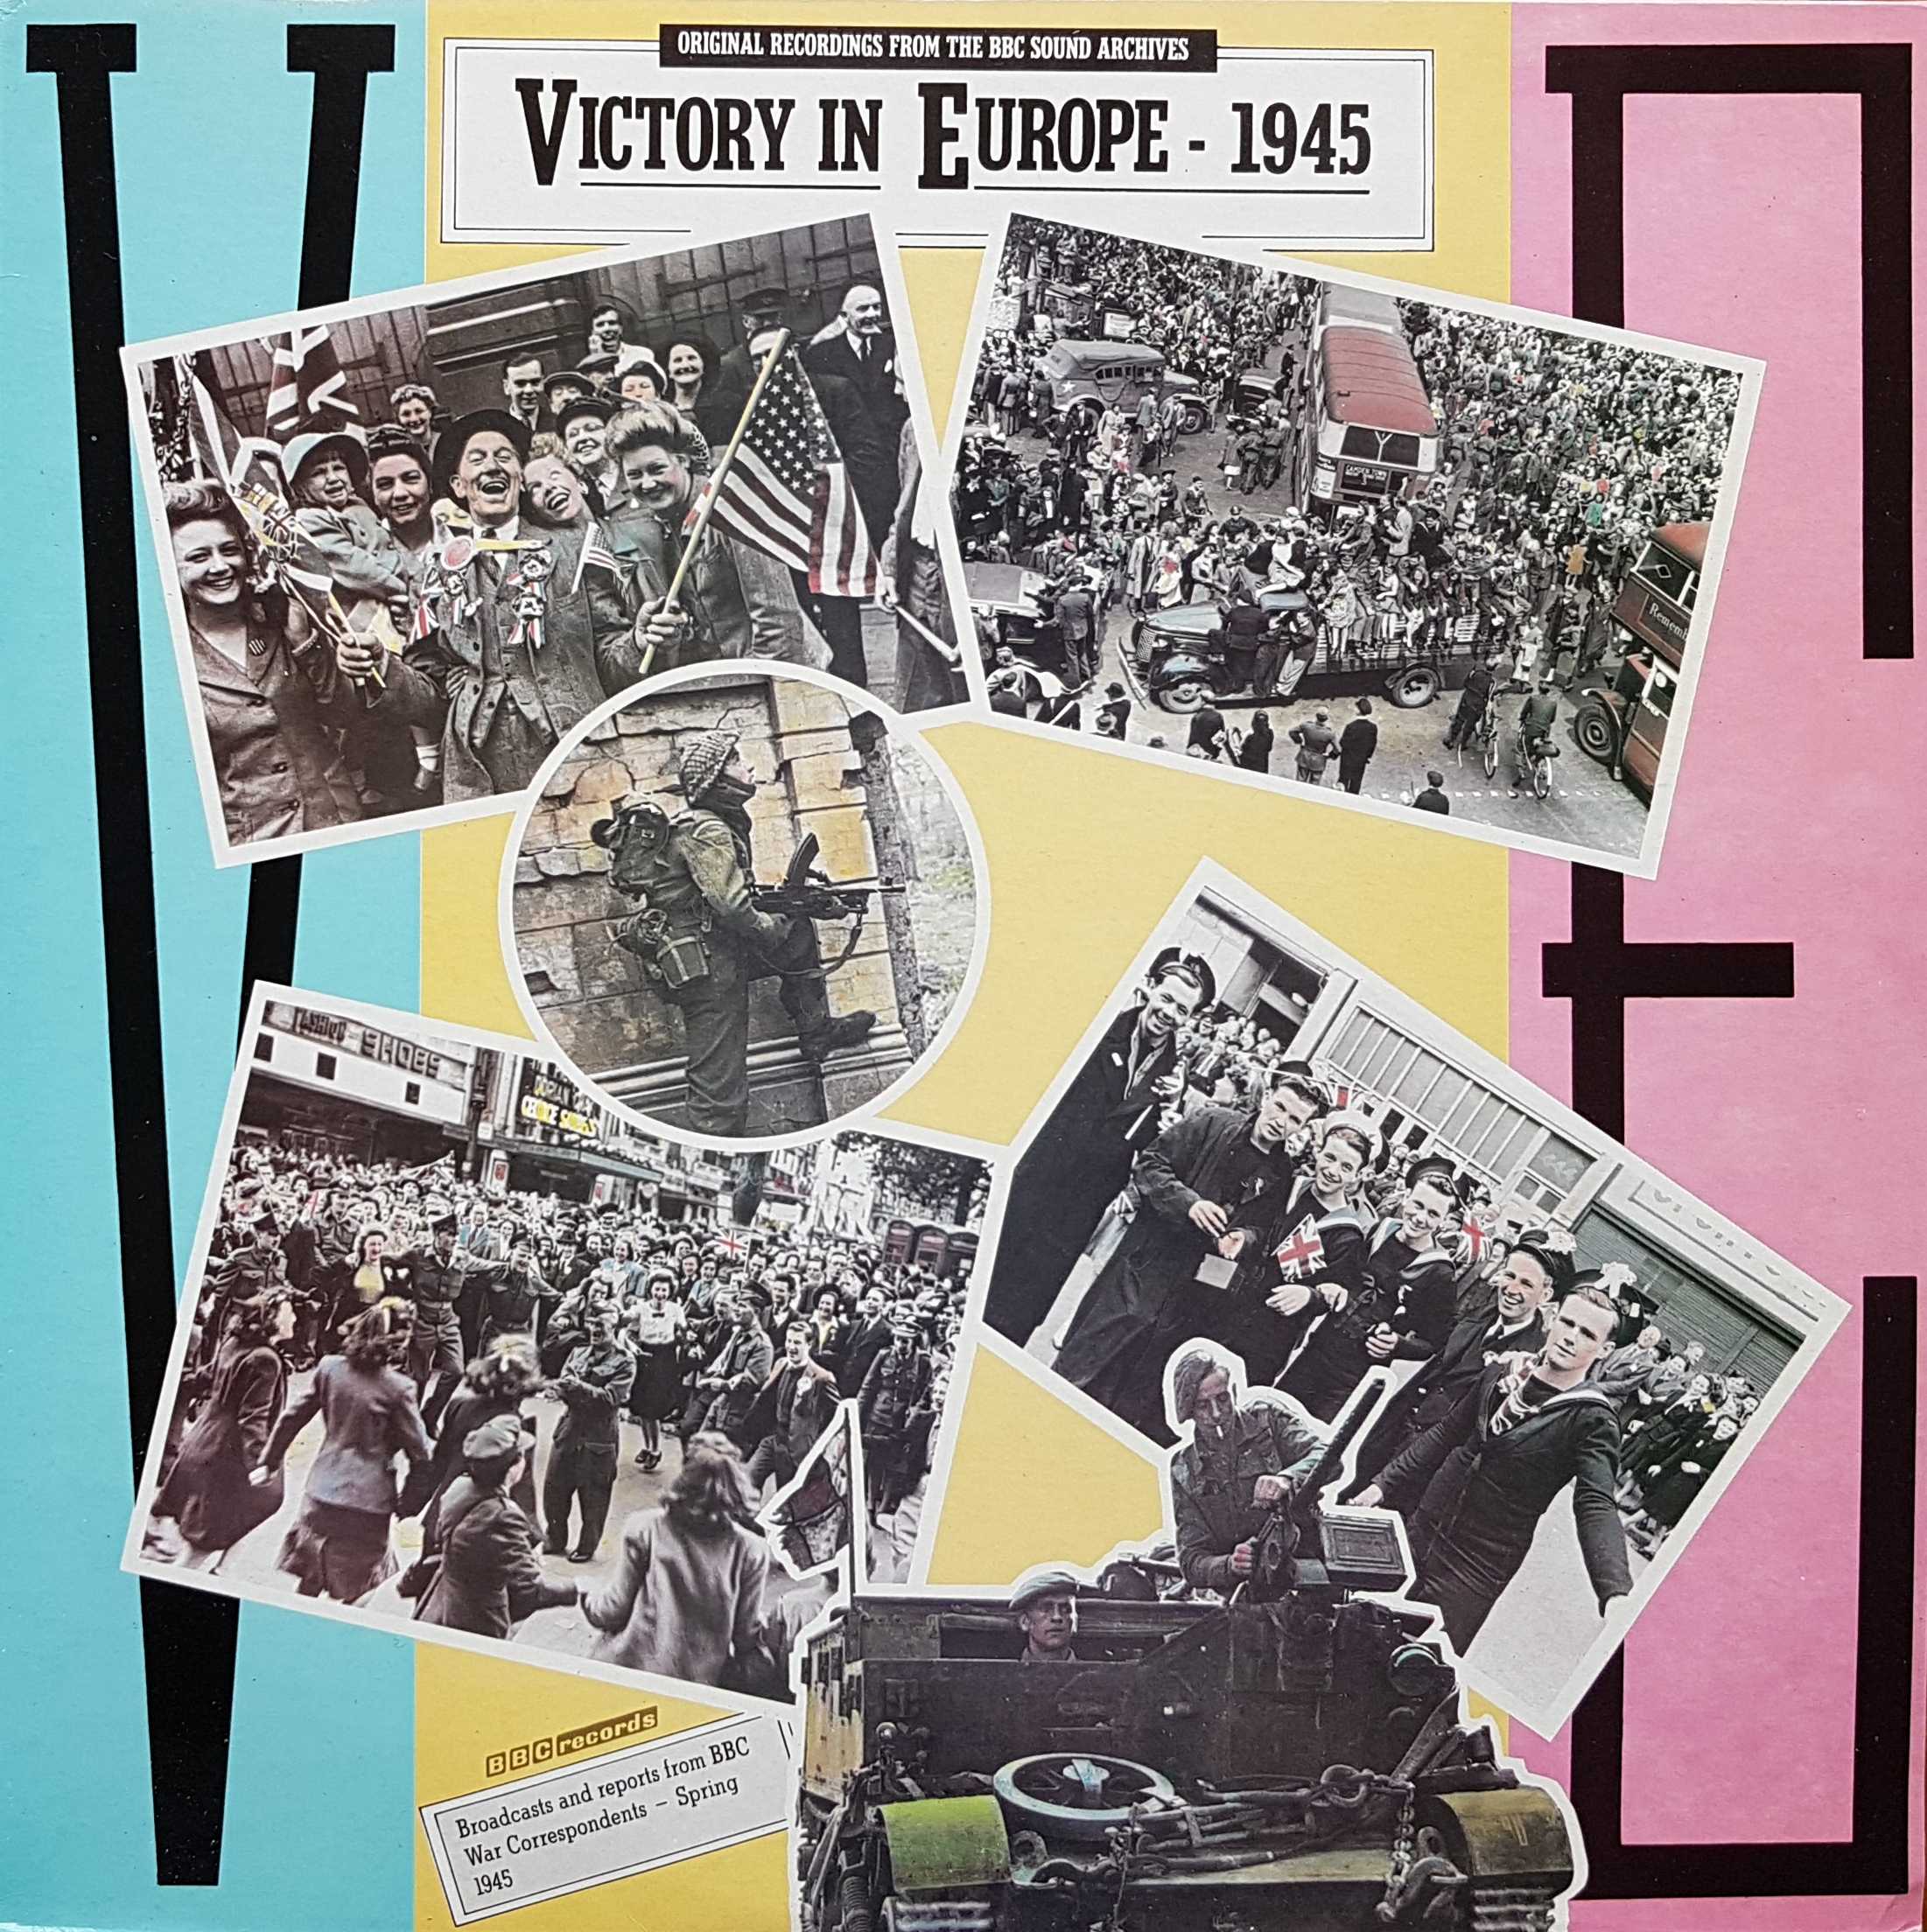 Picture of REC 562 Victory in Europe - 1945 by artist Various from the BBC albums - Records and Tapes library